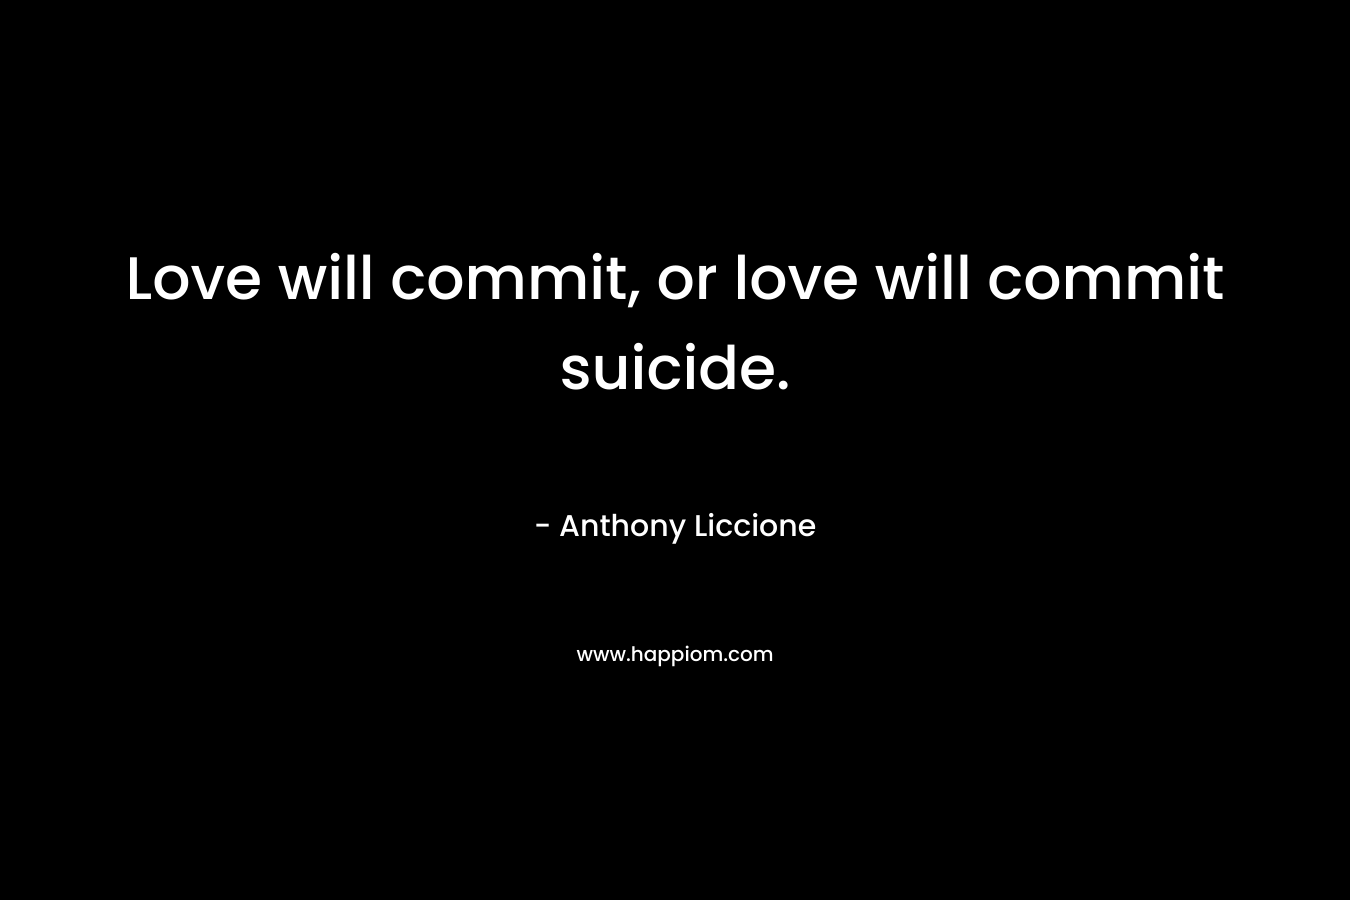 Love will commit, or love will commit suicide. – Anthony Liccione